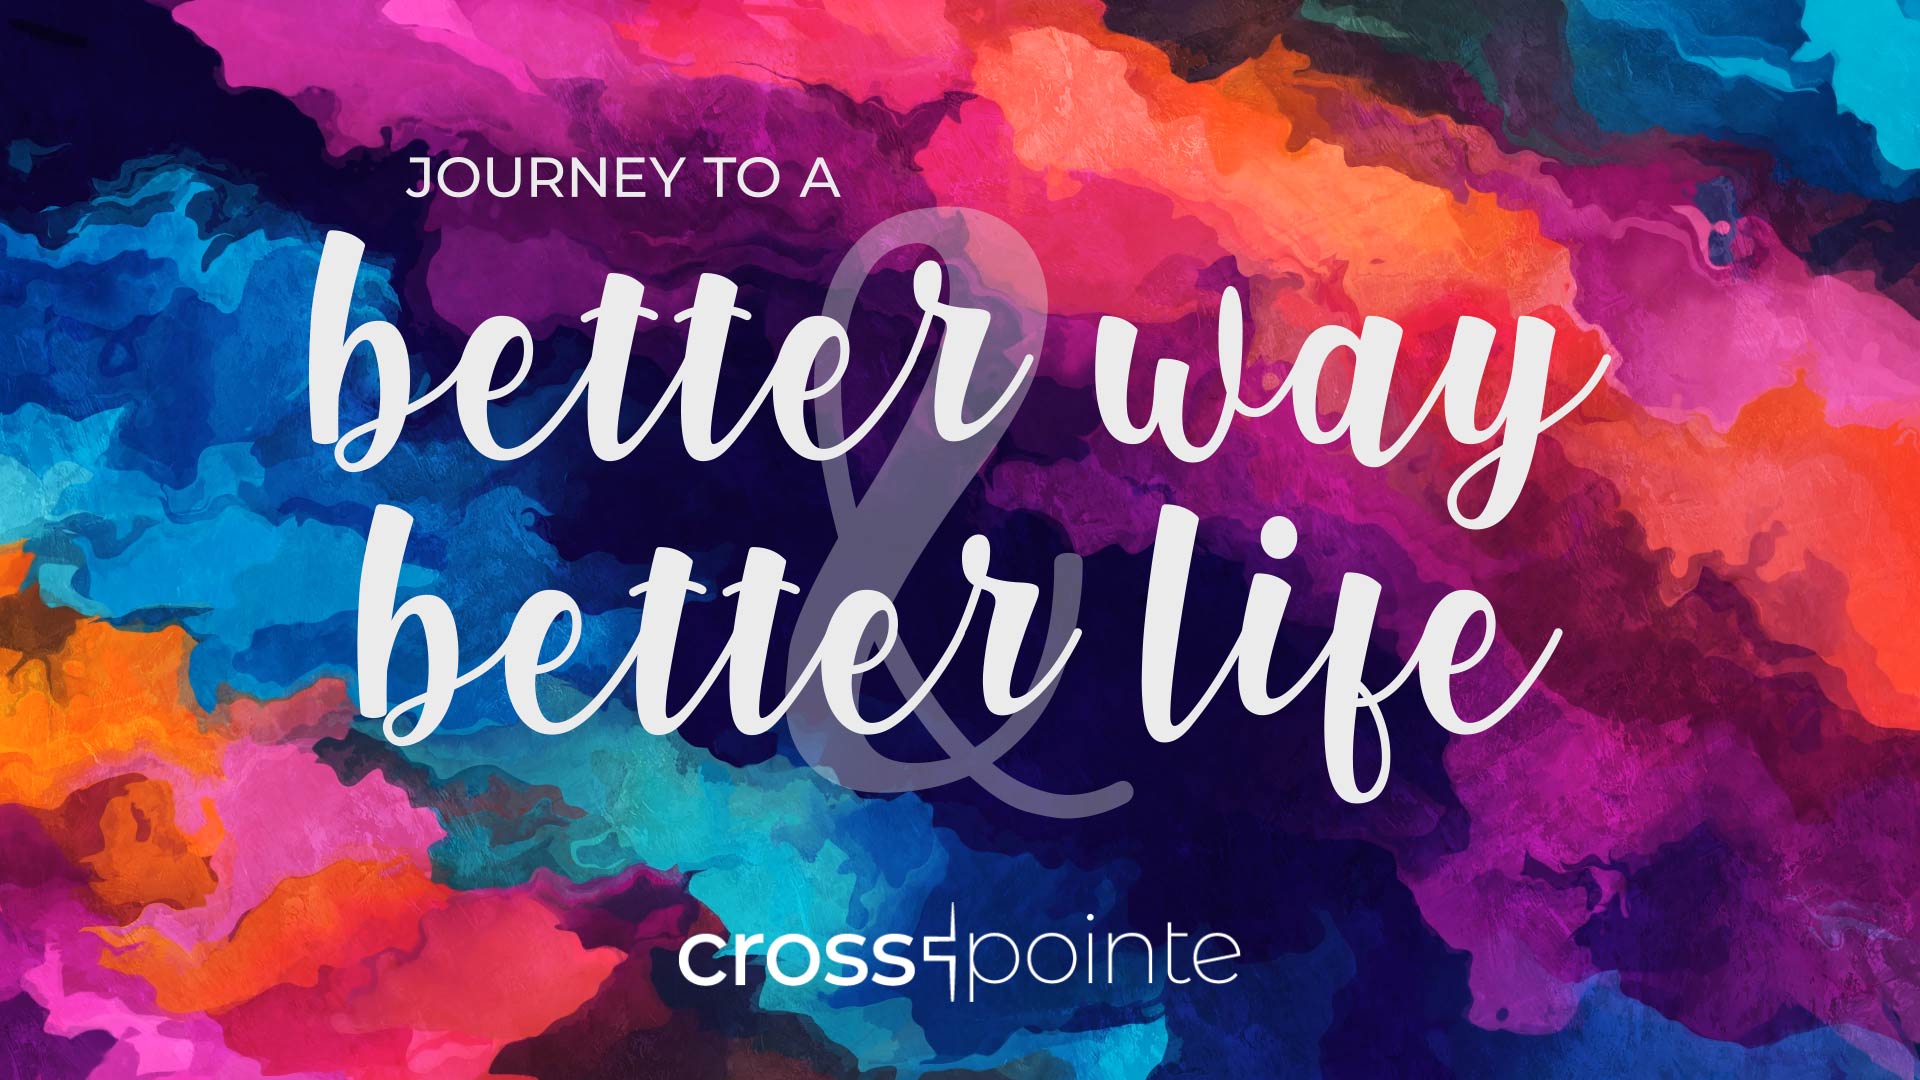 Journey to a Better Way & Better Life